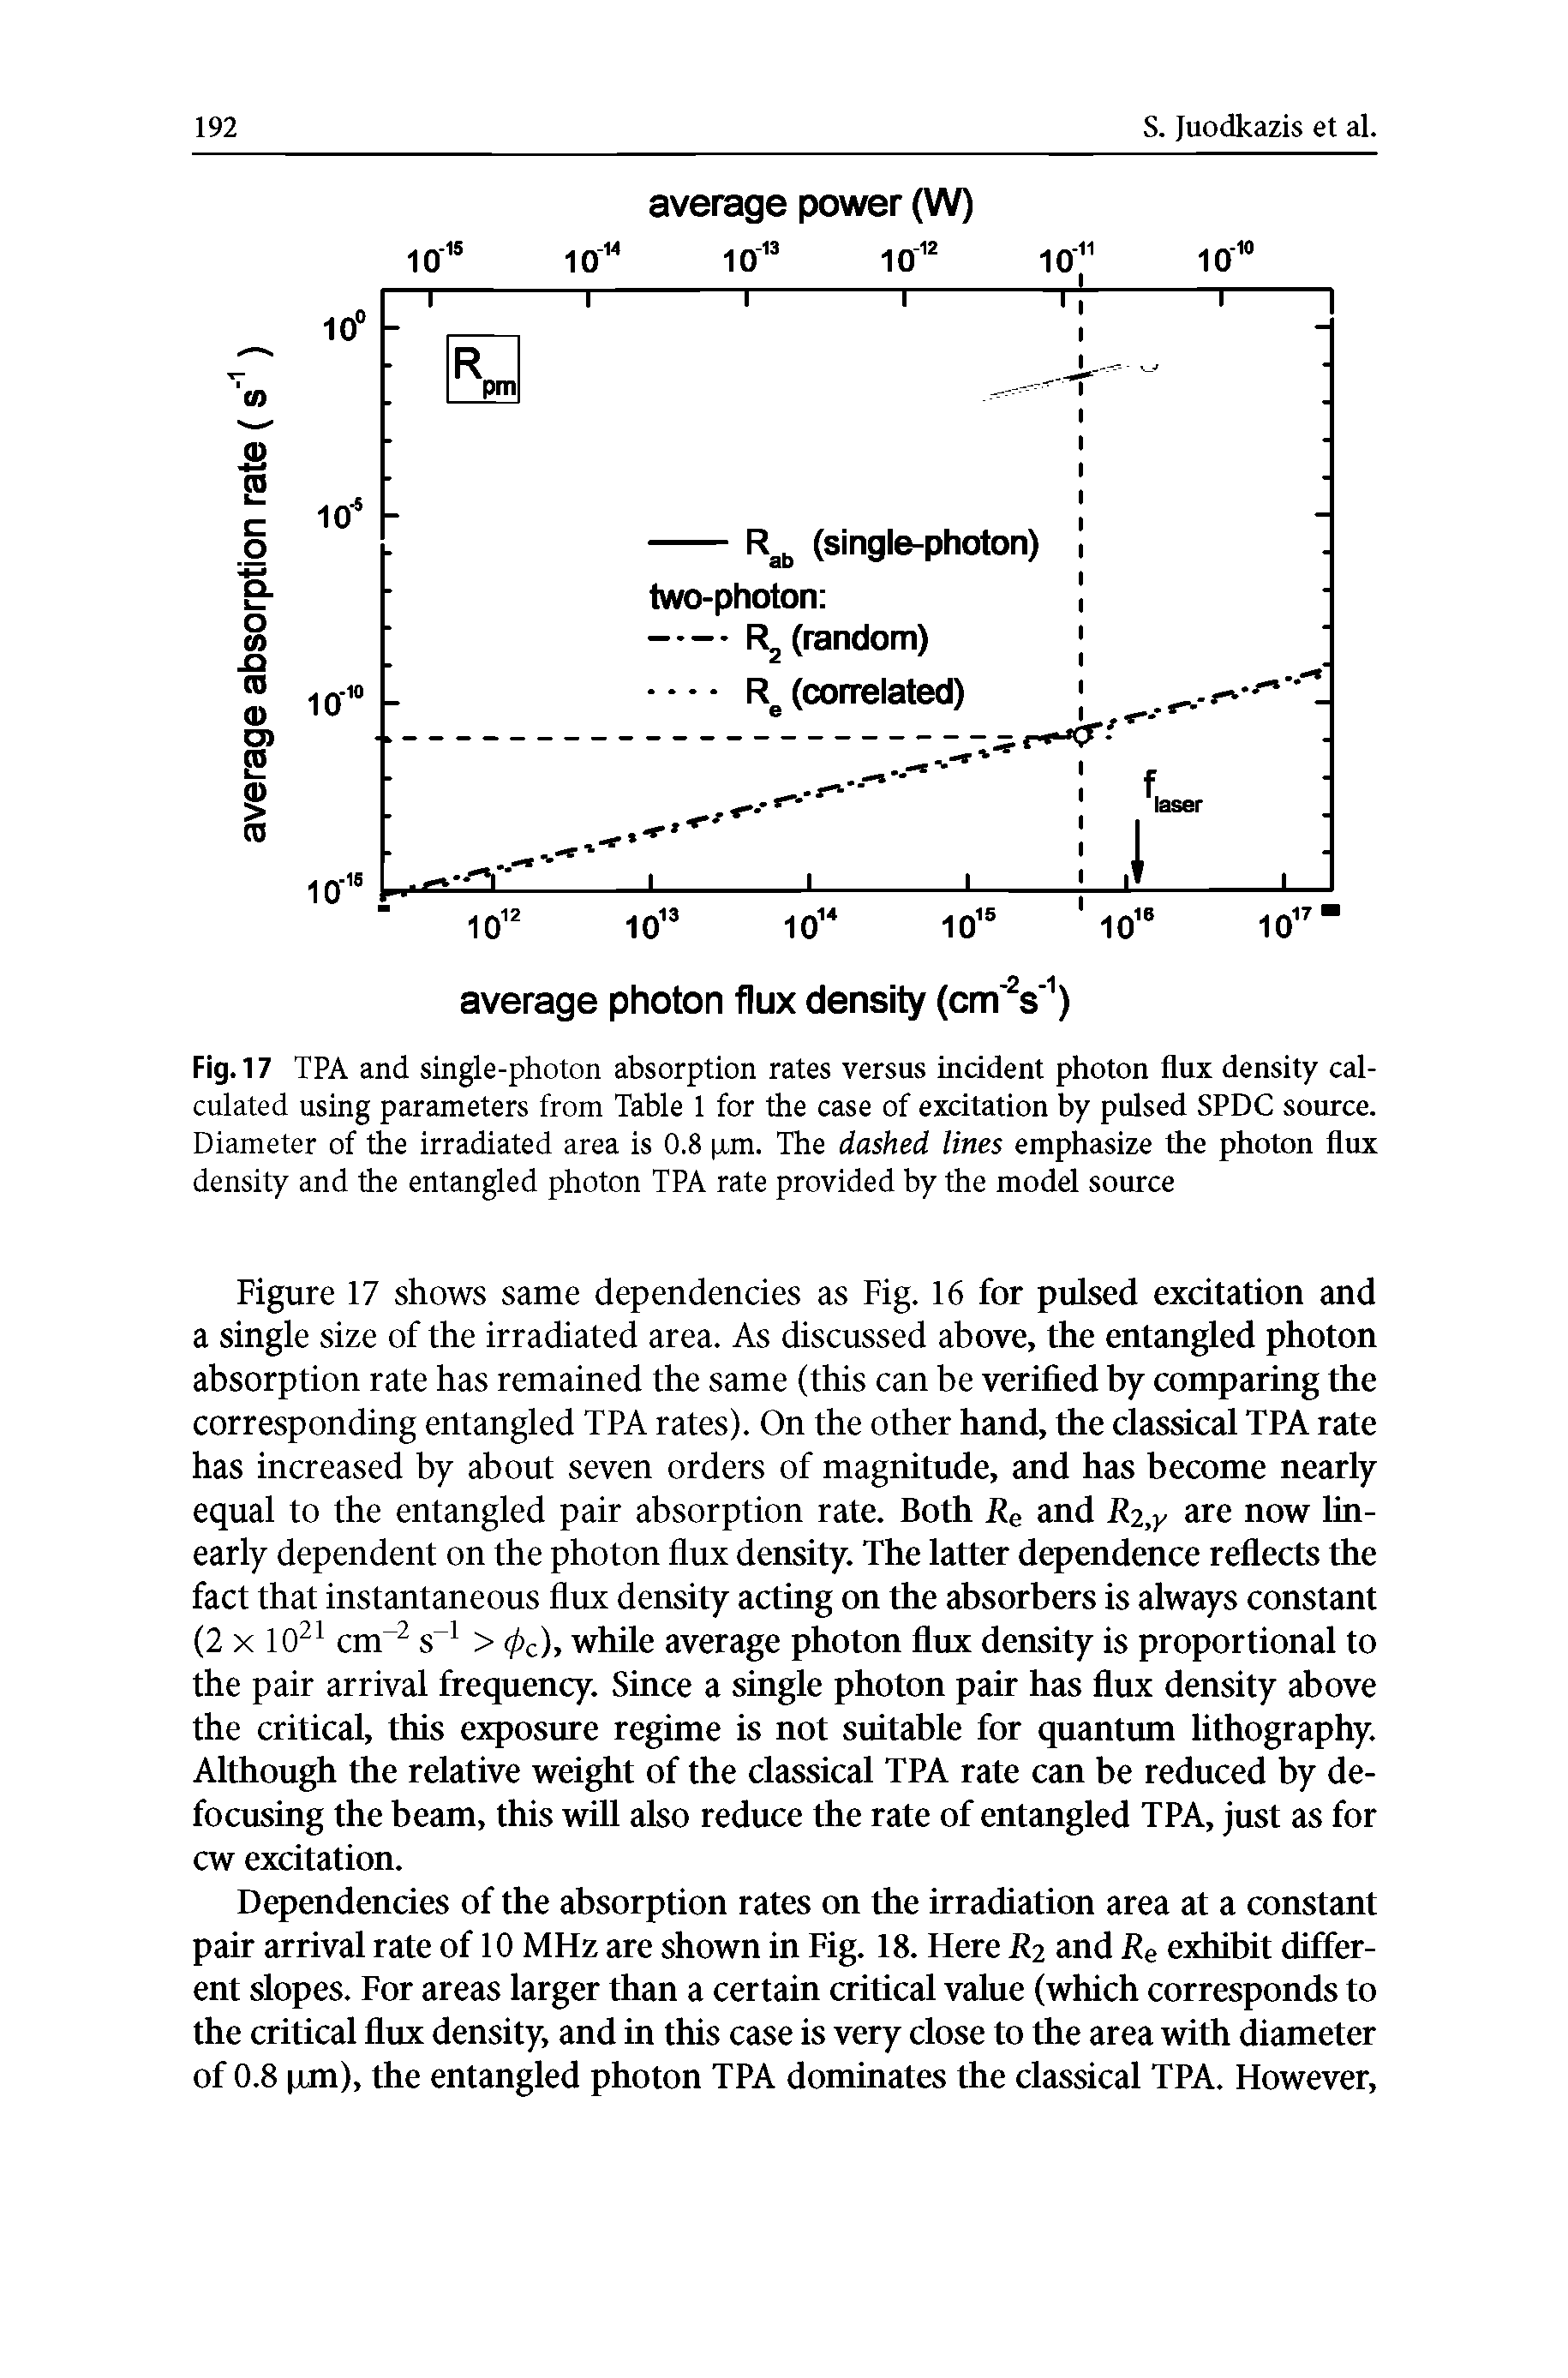 Fig. 17 TPA and single-photon absorption rates versus incident photon flux density calculated using parameters from Table 1 for the case of excitation by pulsed SPDC soimce. Diameter of the irradiated area is 0.8 xm. The dashed lines emphasize the photon flux density and the entangled photon TPA rate provided by the model source...